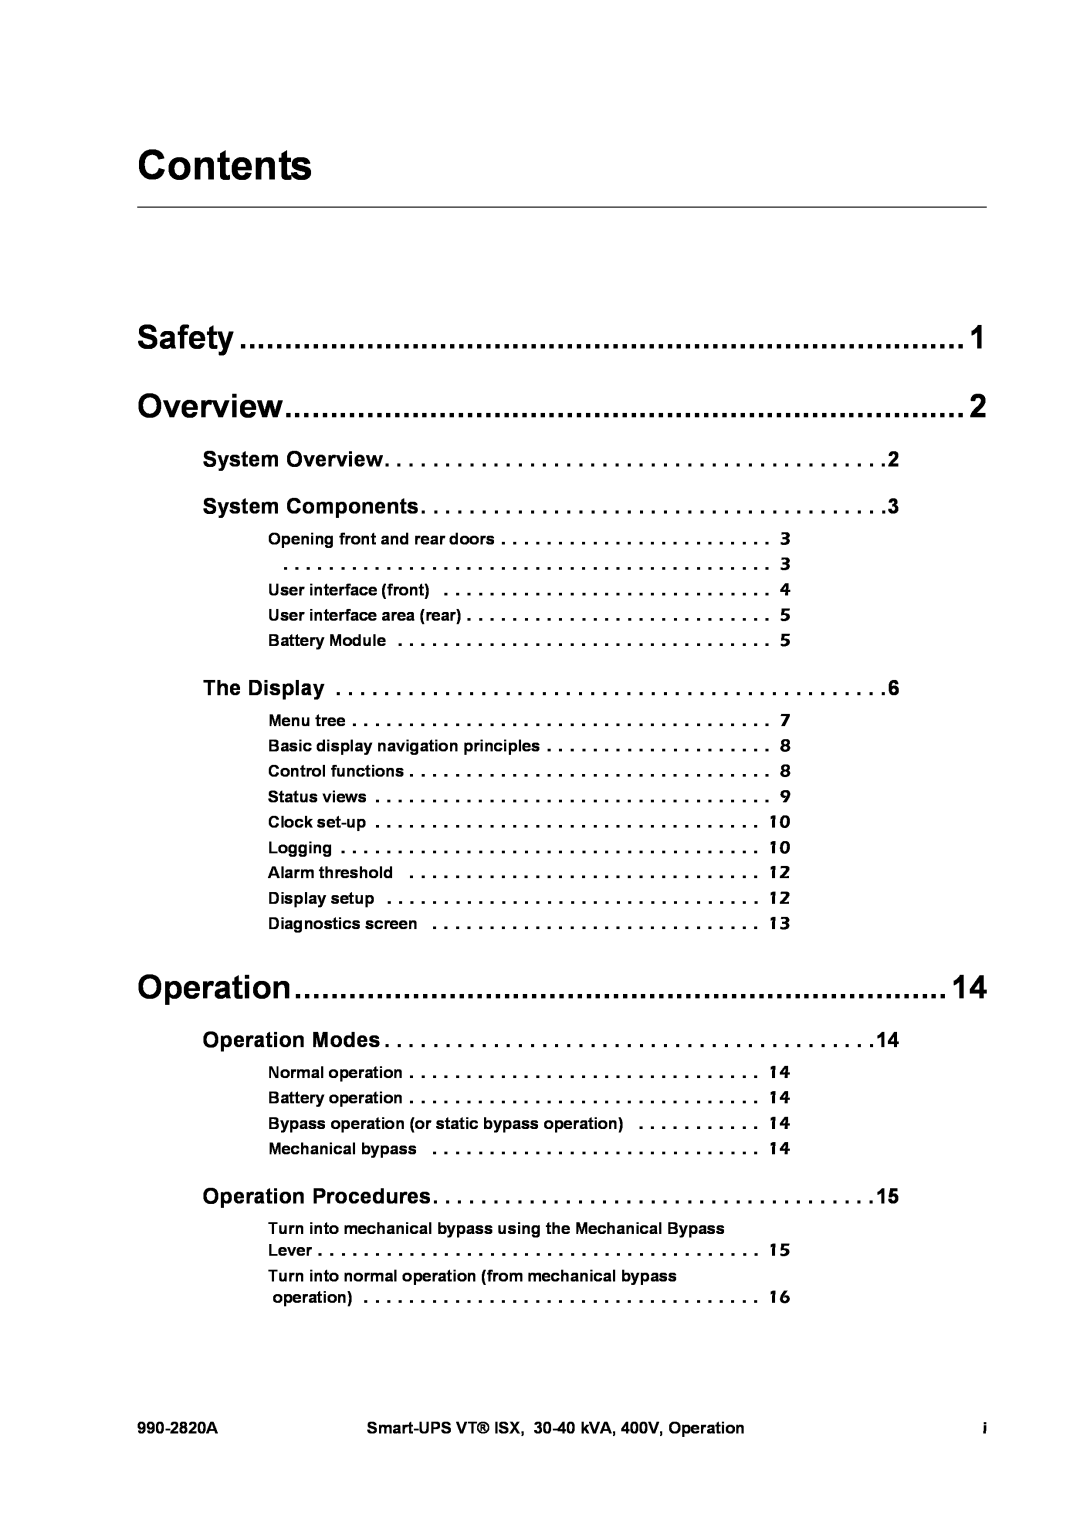 American Power Conversion VT ISX manual Safety, Overview, The Display, Operation Modes, Operation Procedures, Contents 